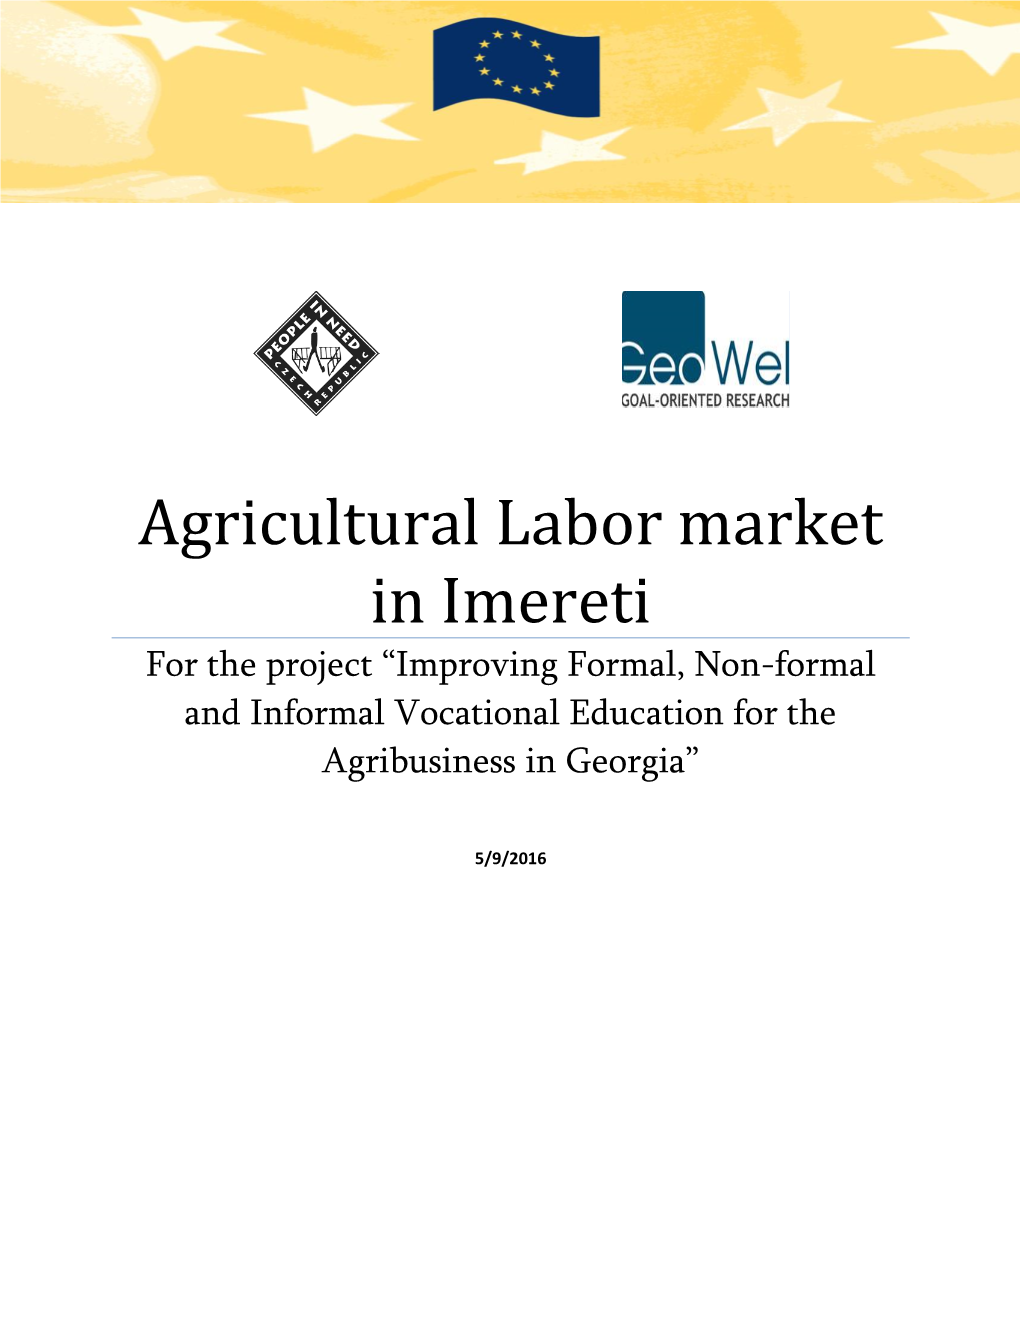 Agricultural Labor Market in Imereti for the Project “Improving Formal, Non-Formal and Informal Vocational Education for the Agribusiness in Georgia”